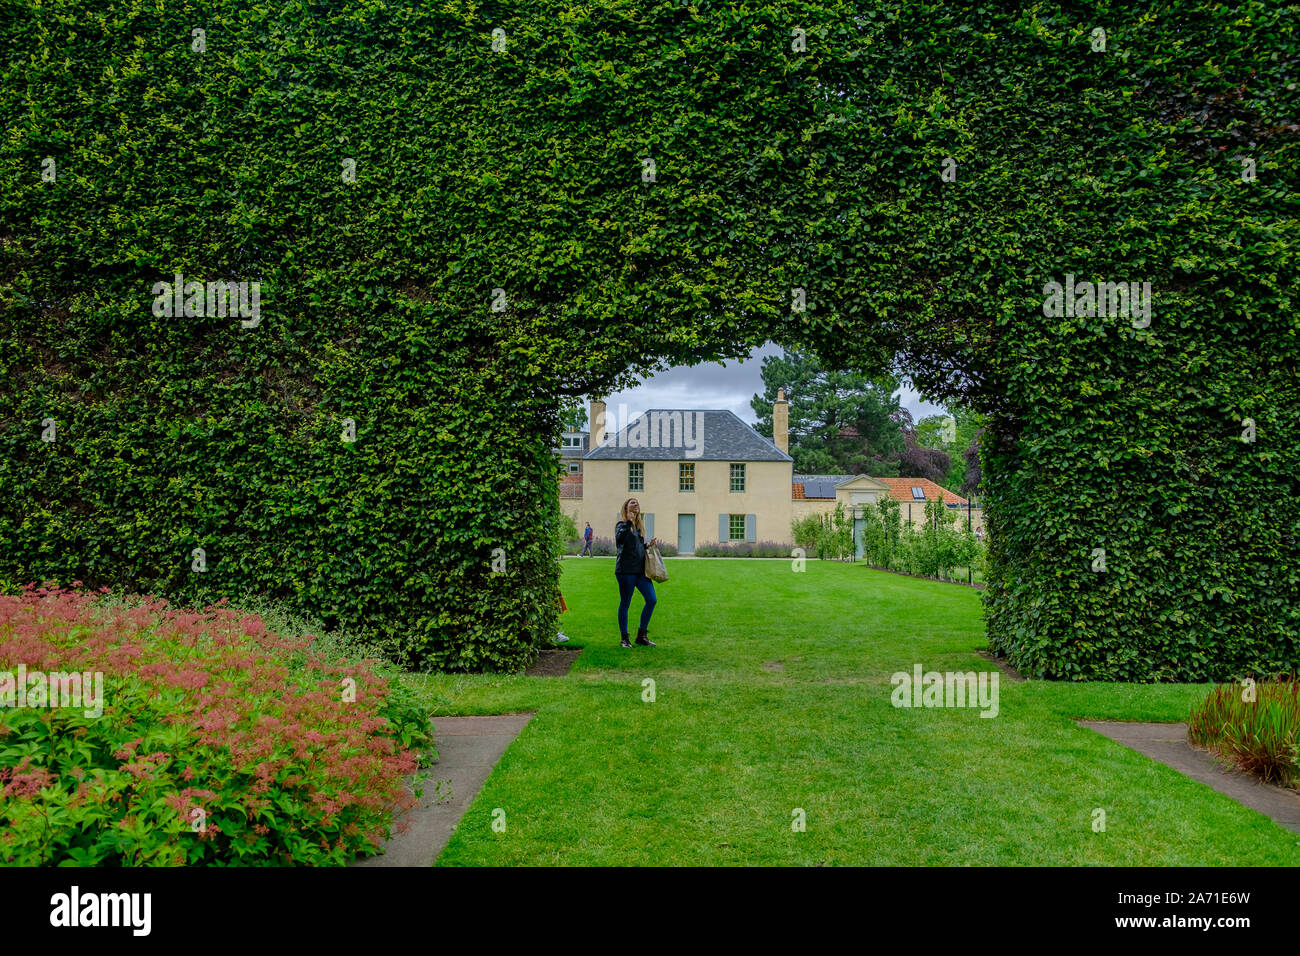 Edinburgh, United Kingdom - July 5, 2019: View of a woman standing at the opening in a long bush fence at the Royal Botanic Garden in Edinburgh, Scotl Stock Photo